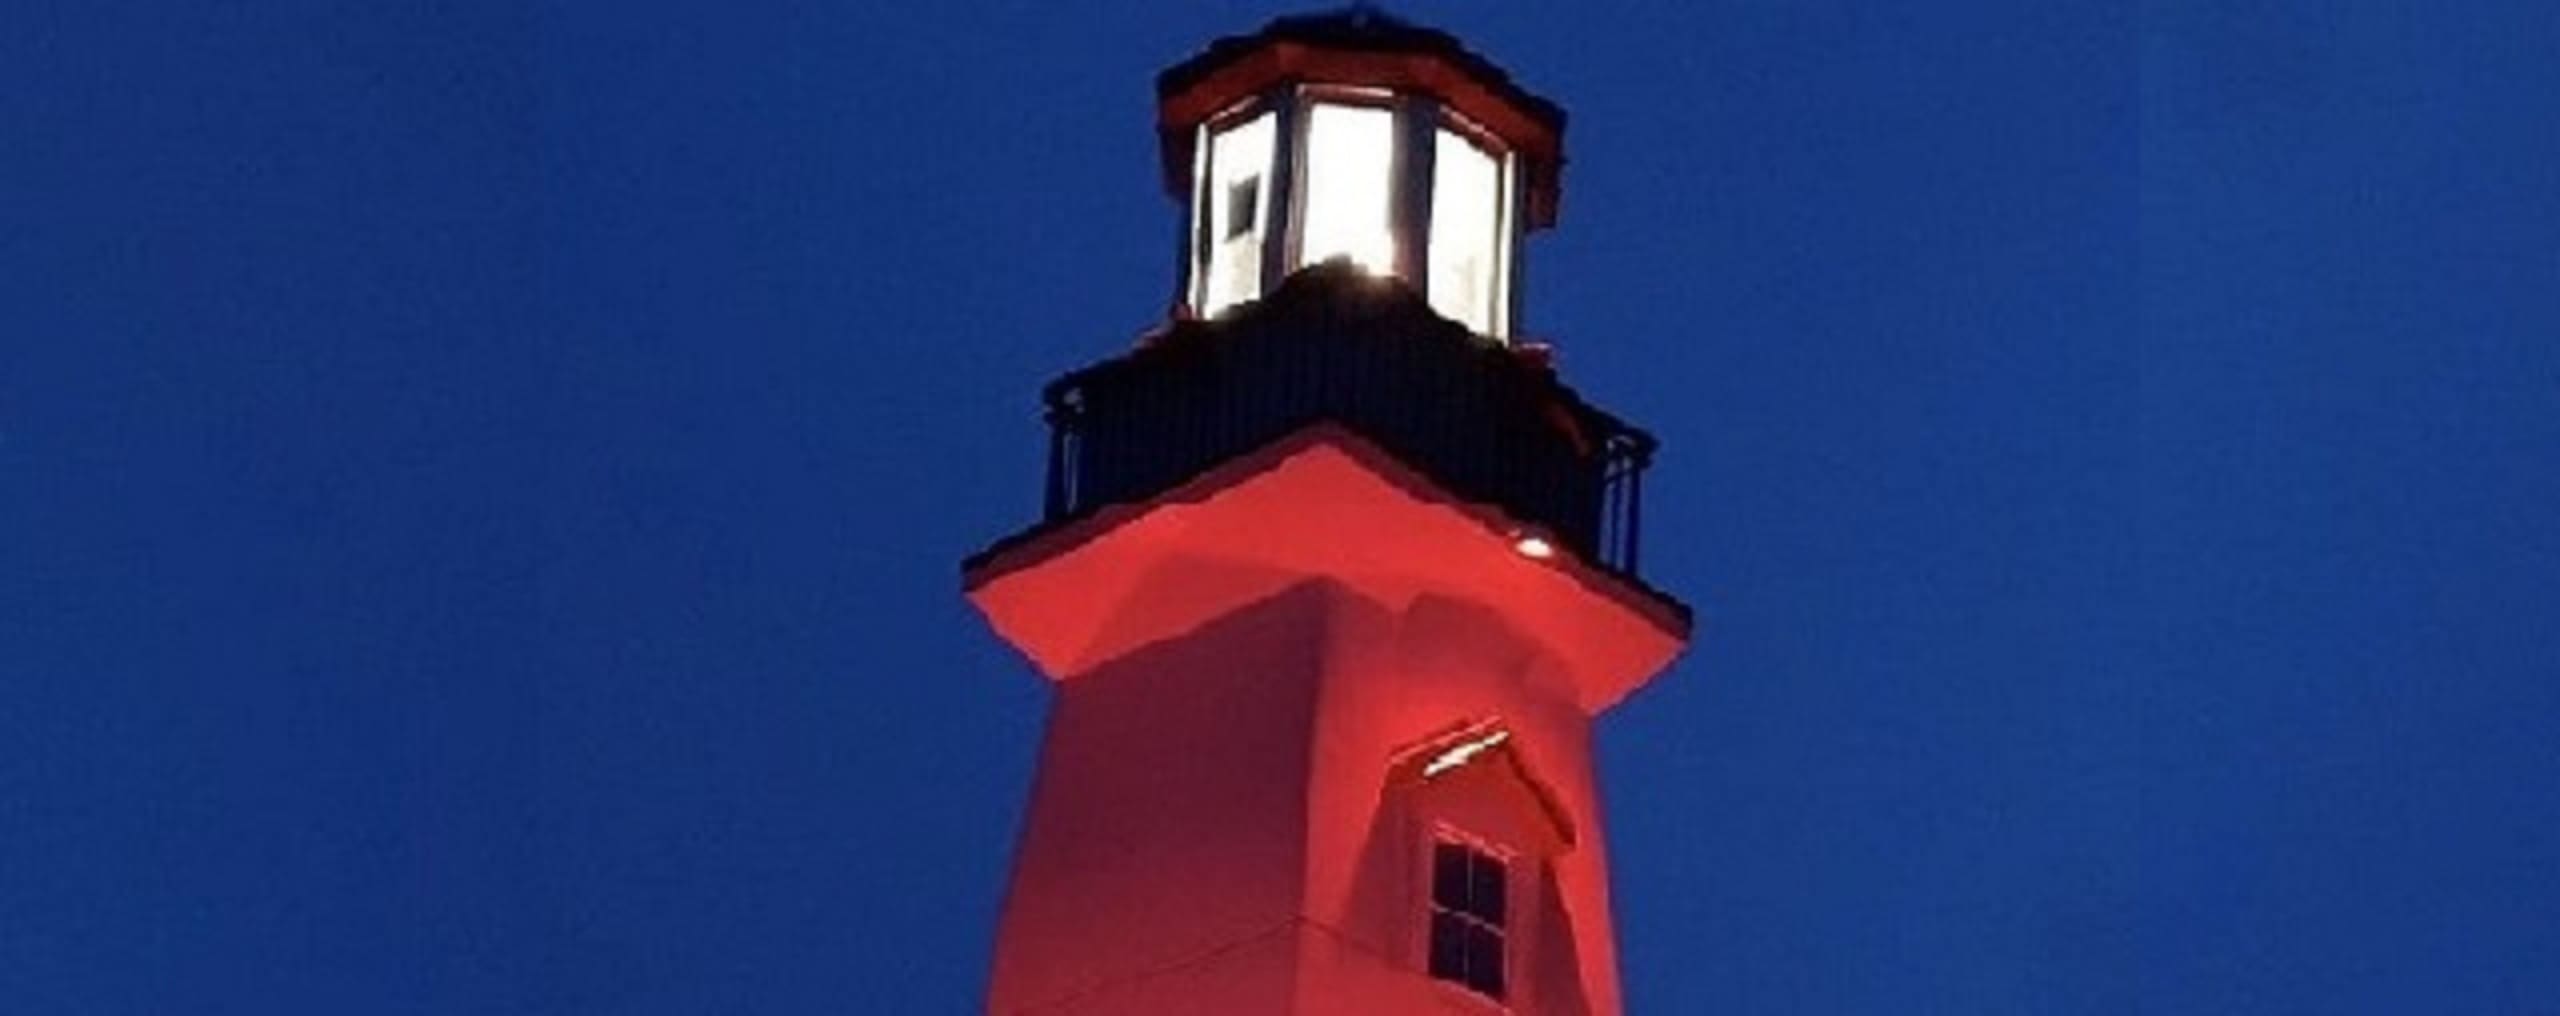 Lighting of the Lighthouse